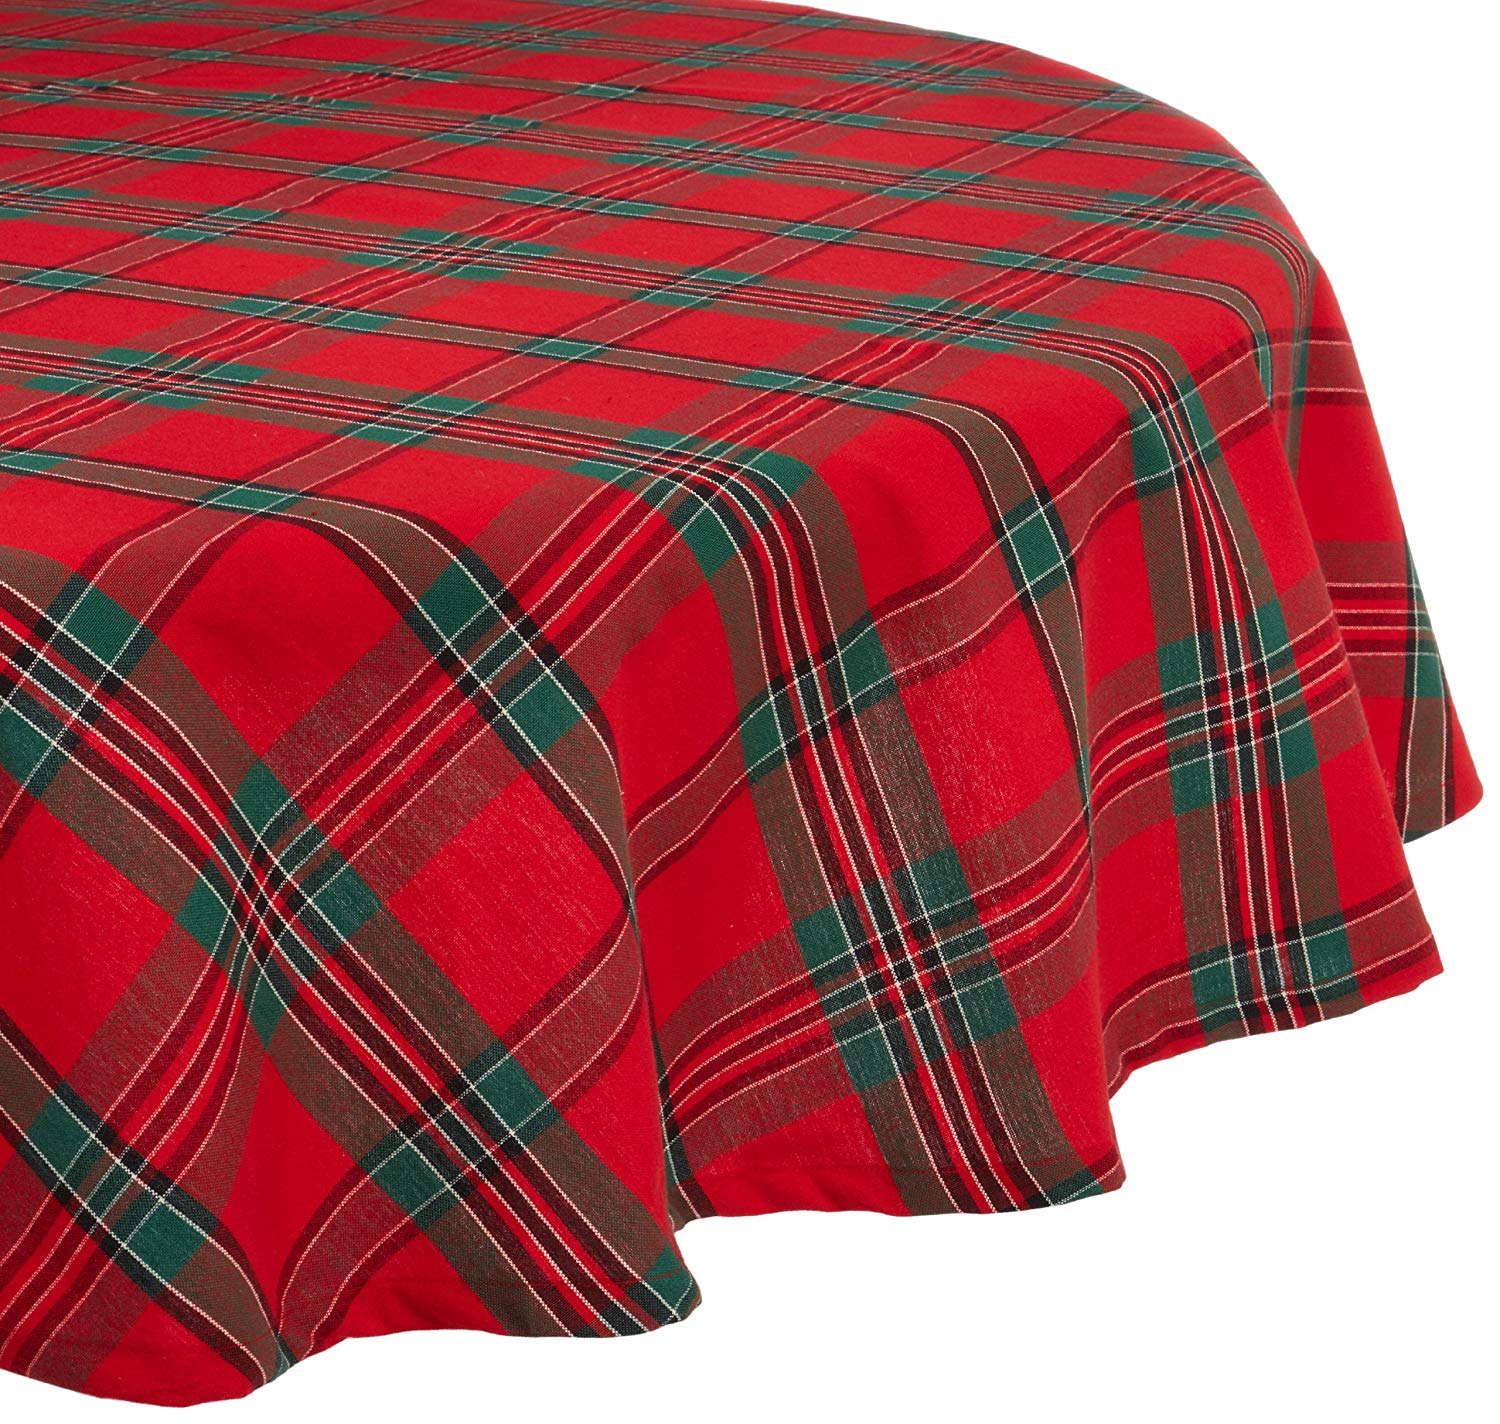 dii holiday plaid round tablecloth cotton with oyl accent hem for family gatherings christmas dinner seats kitchen market patio umbrella runner rugs table white glass lamp shades